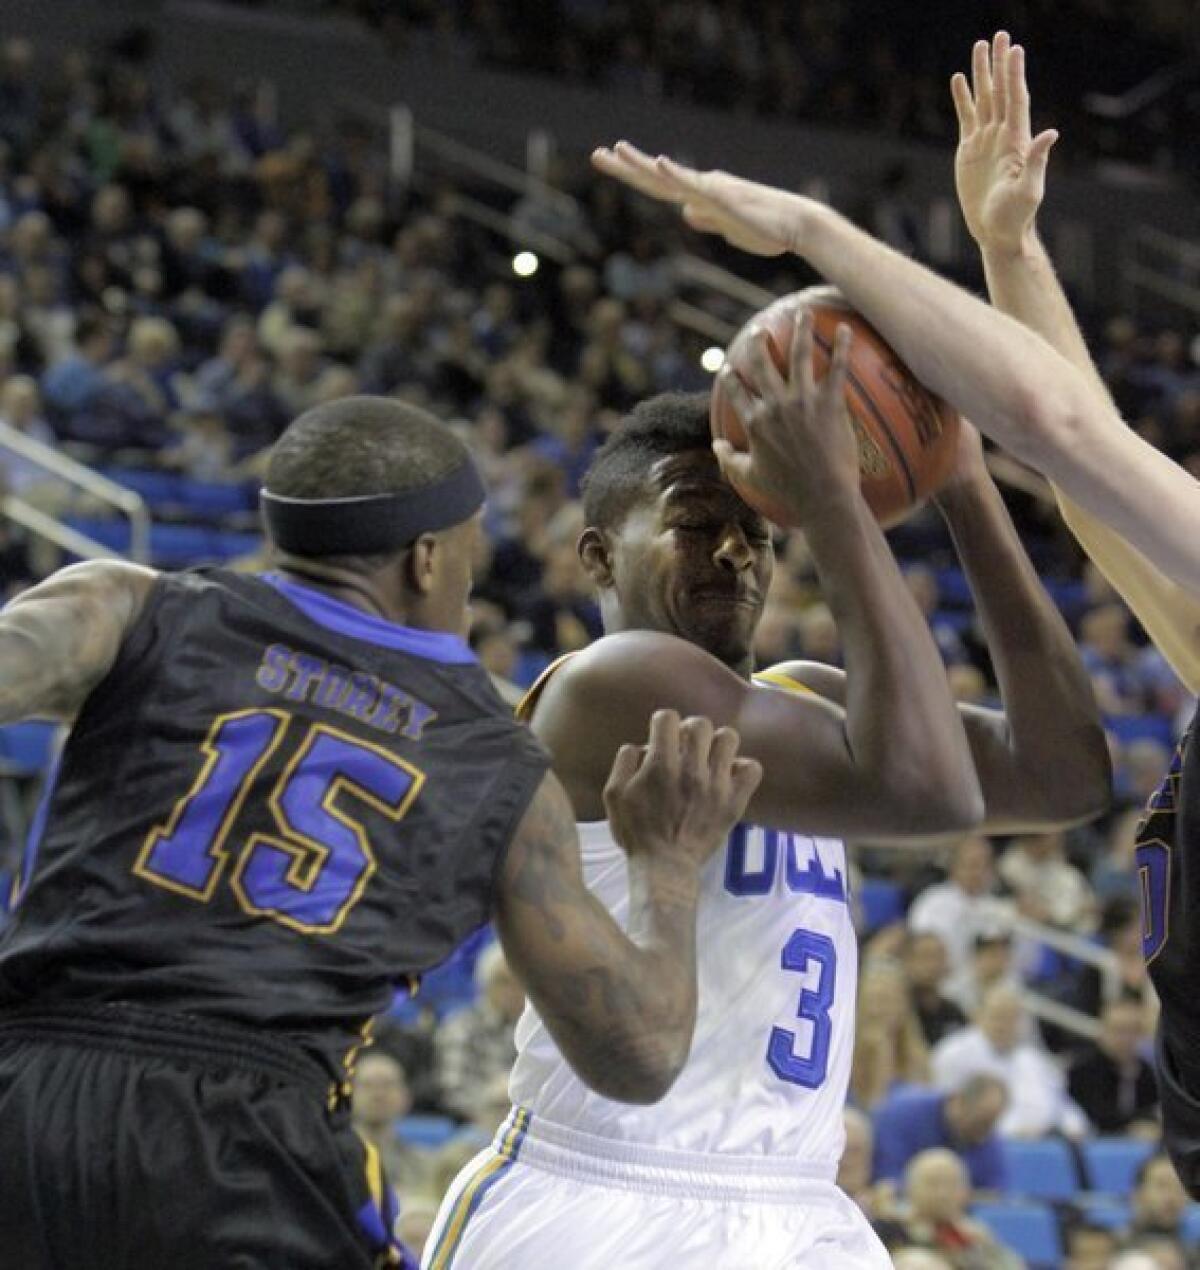 UCLA's Jordan Adams is smothered by Morehead State's defense during the first half on Nov. 22 at Pauley Pavilion.